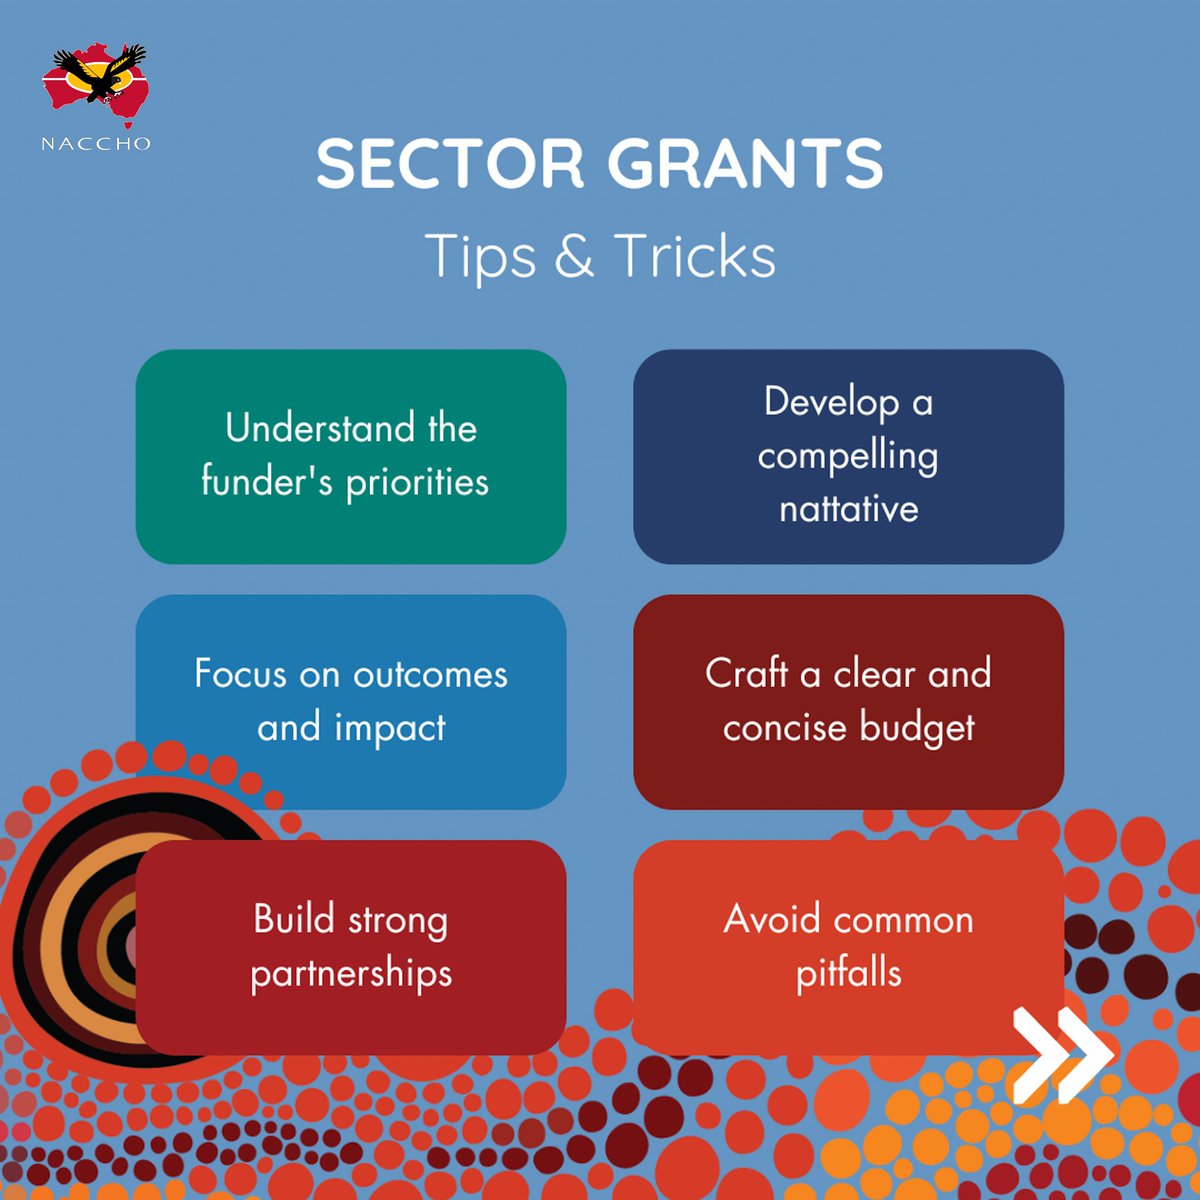 Is your ACCHO eligible for potential grant opportunities? Some helpful tips and tricks to help you write a winning grant proposal: naccho.org.au/news-events/se…